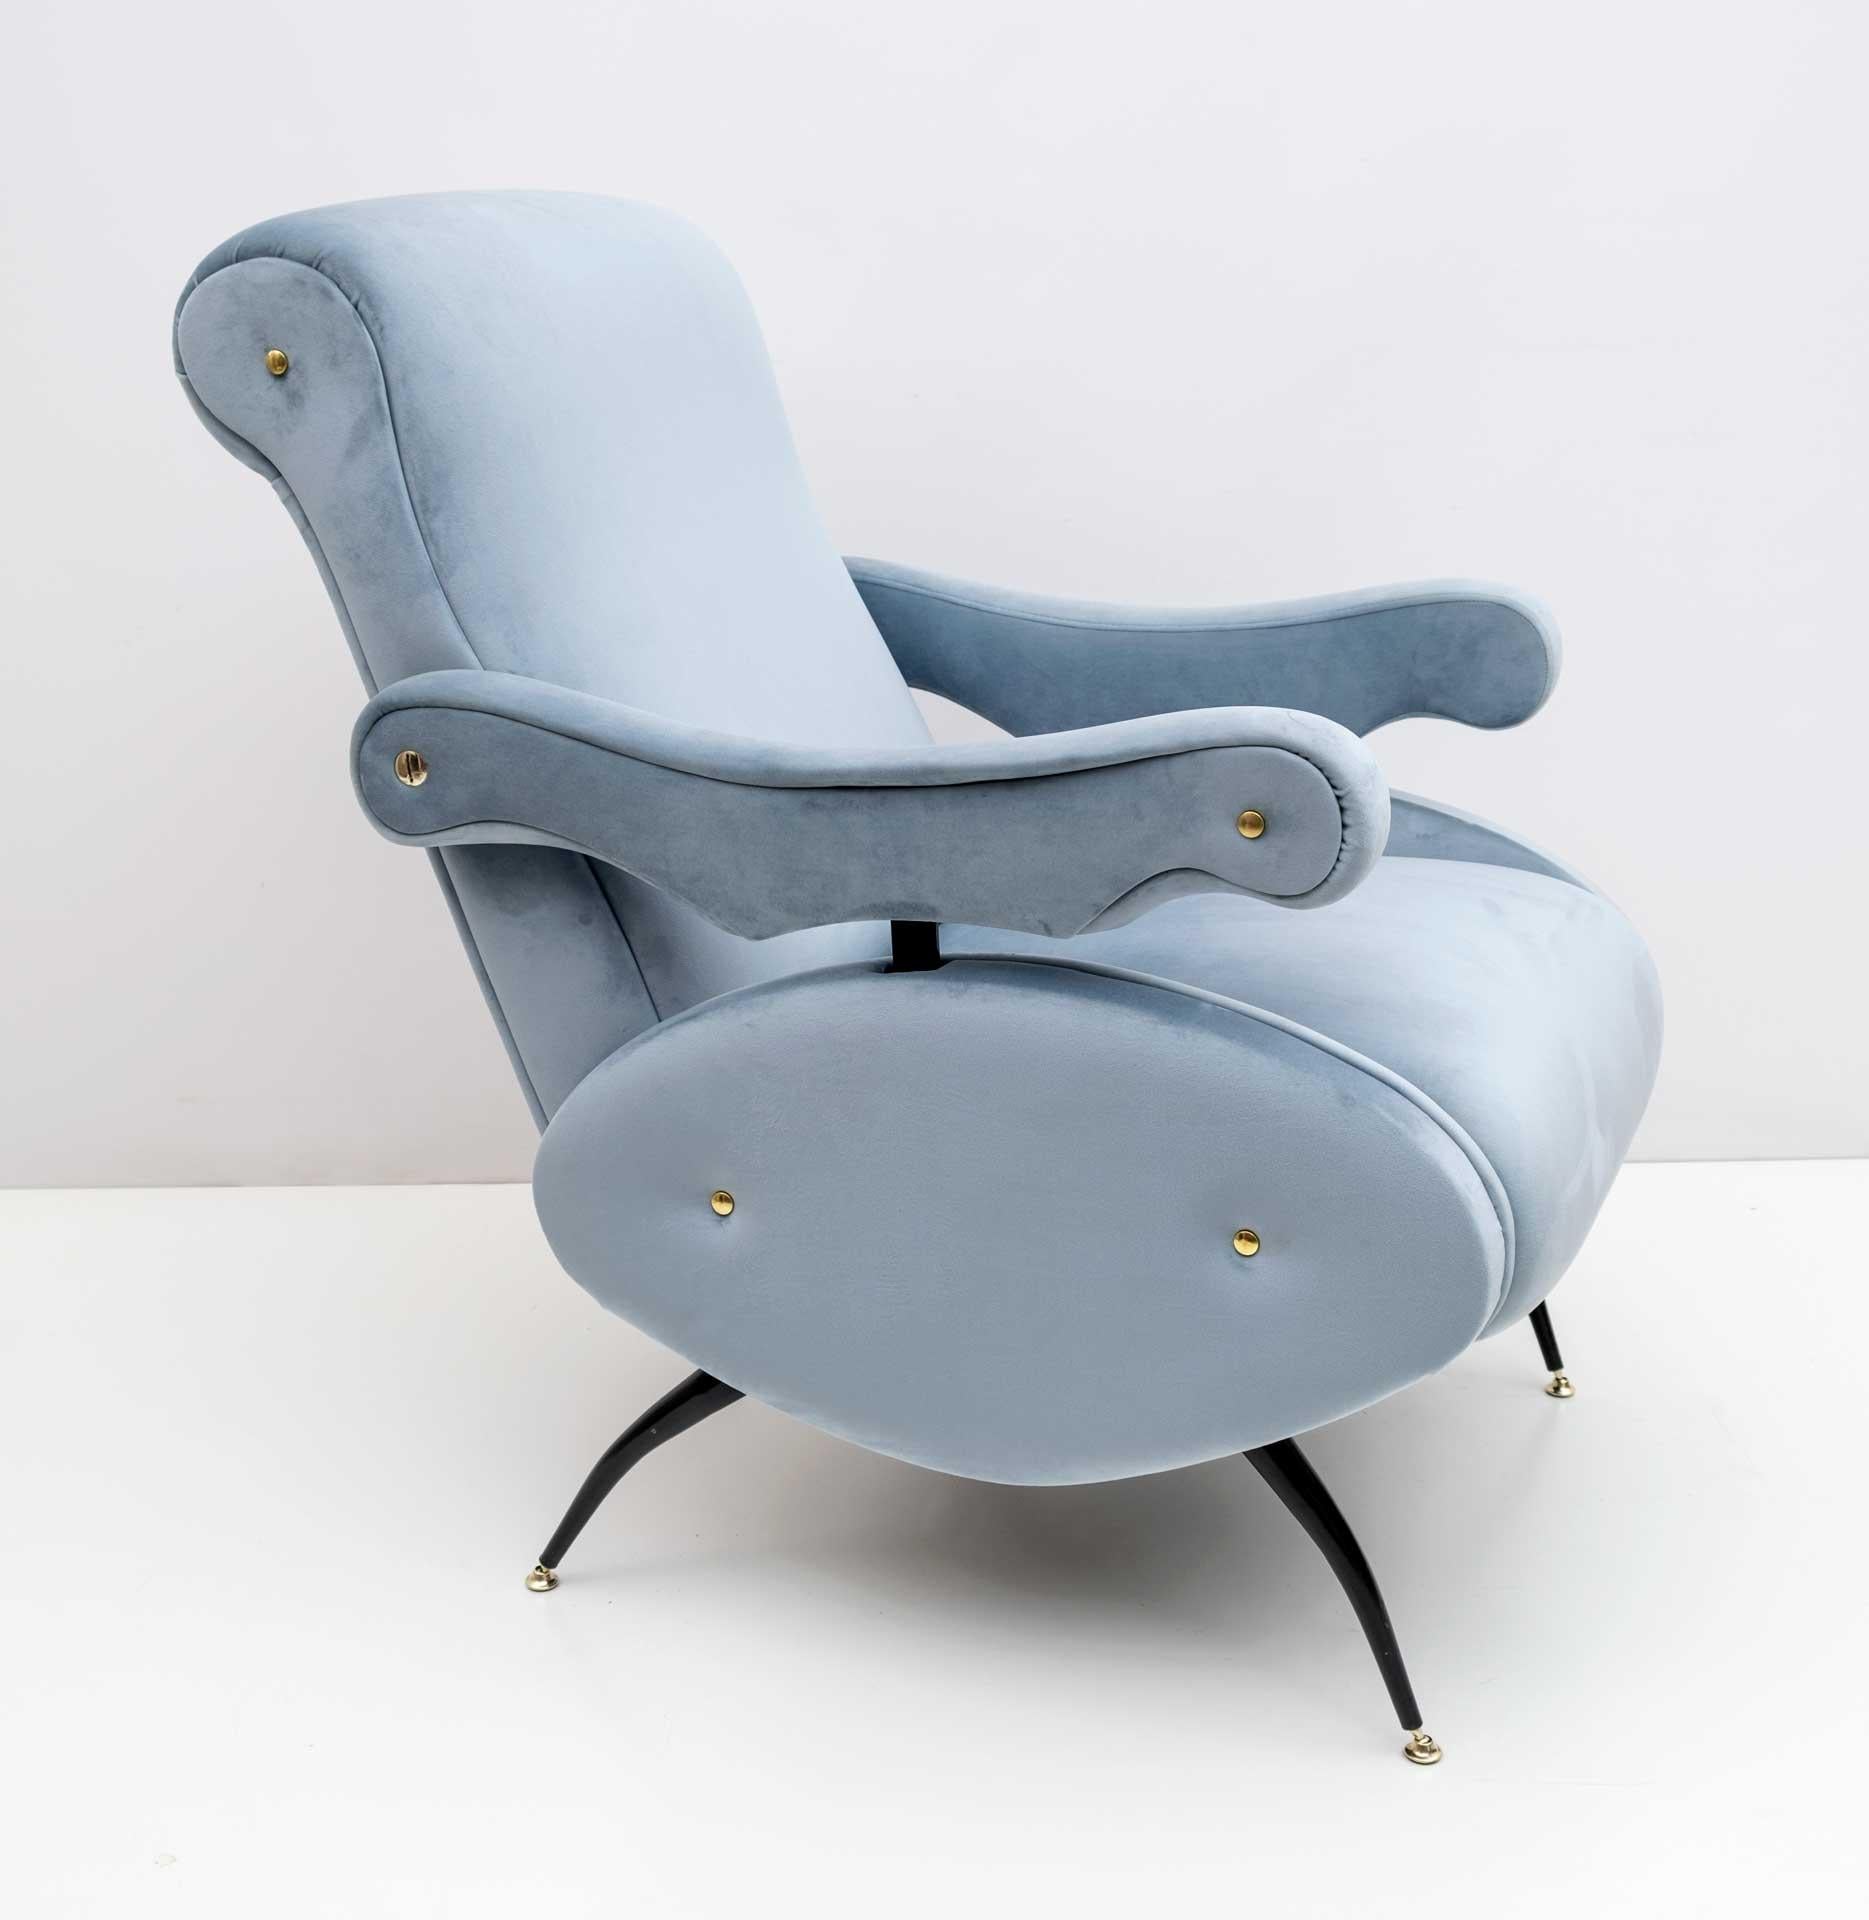 Reclining armchair designed by Nello Pini for Novarredo in the 1950s, the armchair has been restored and upholstered in light blue velvet.